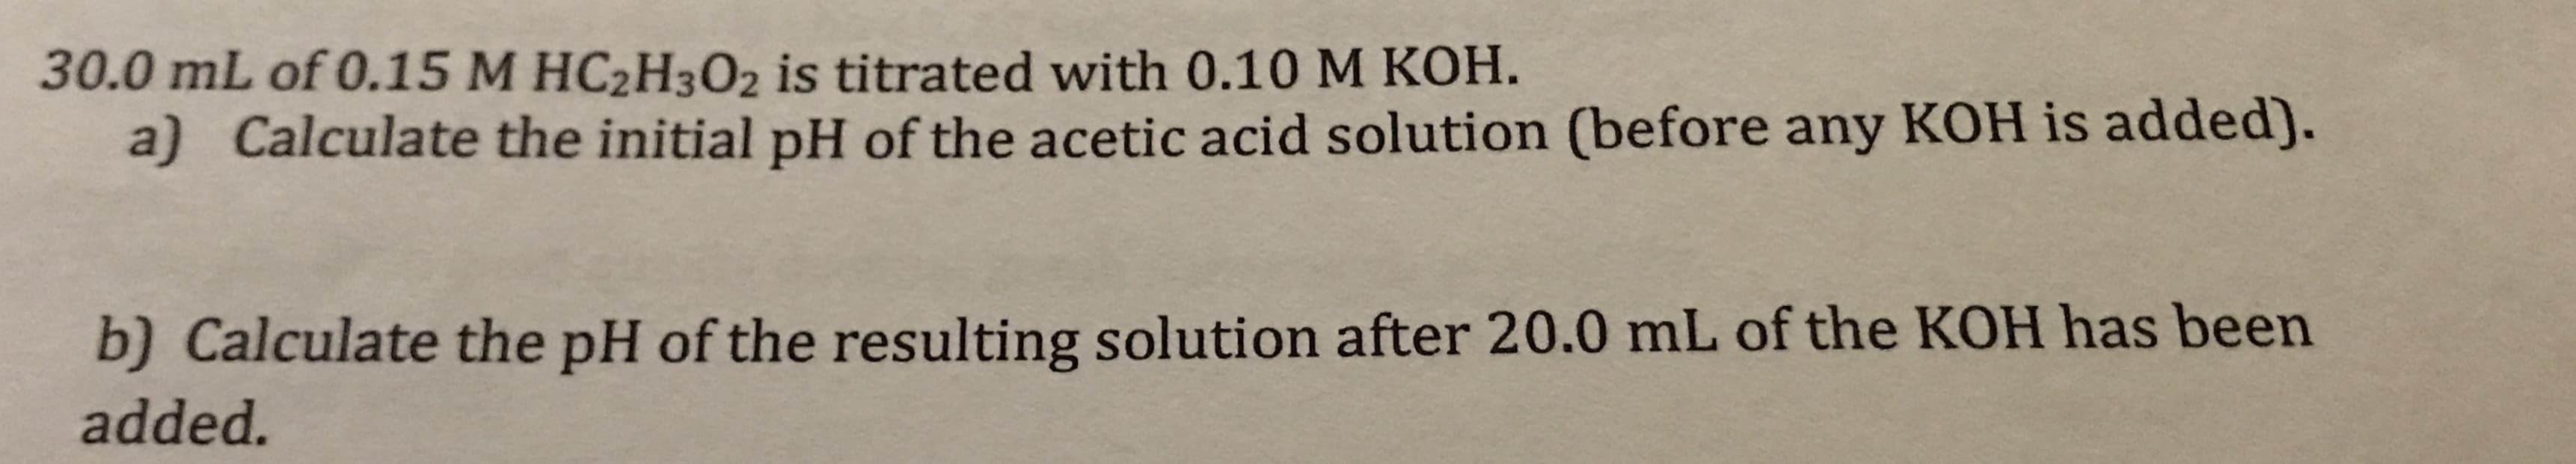 30.0 mL of 0.15 M HC2H302 is titrated with 0.10 M KOH.
a) Calculate the initial pH of the acetic acid solution (before any KOH is added).
b) Calculate the pH of the resulting solution after 20.0 mL of the KOH has been
added.
